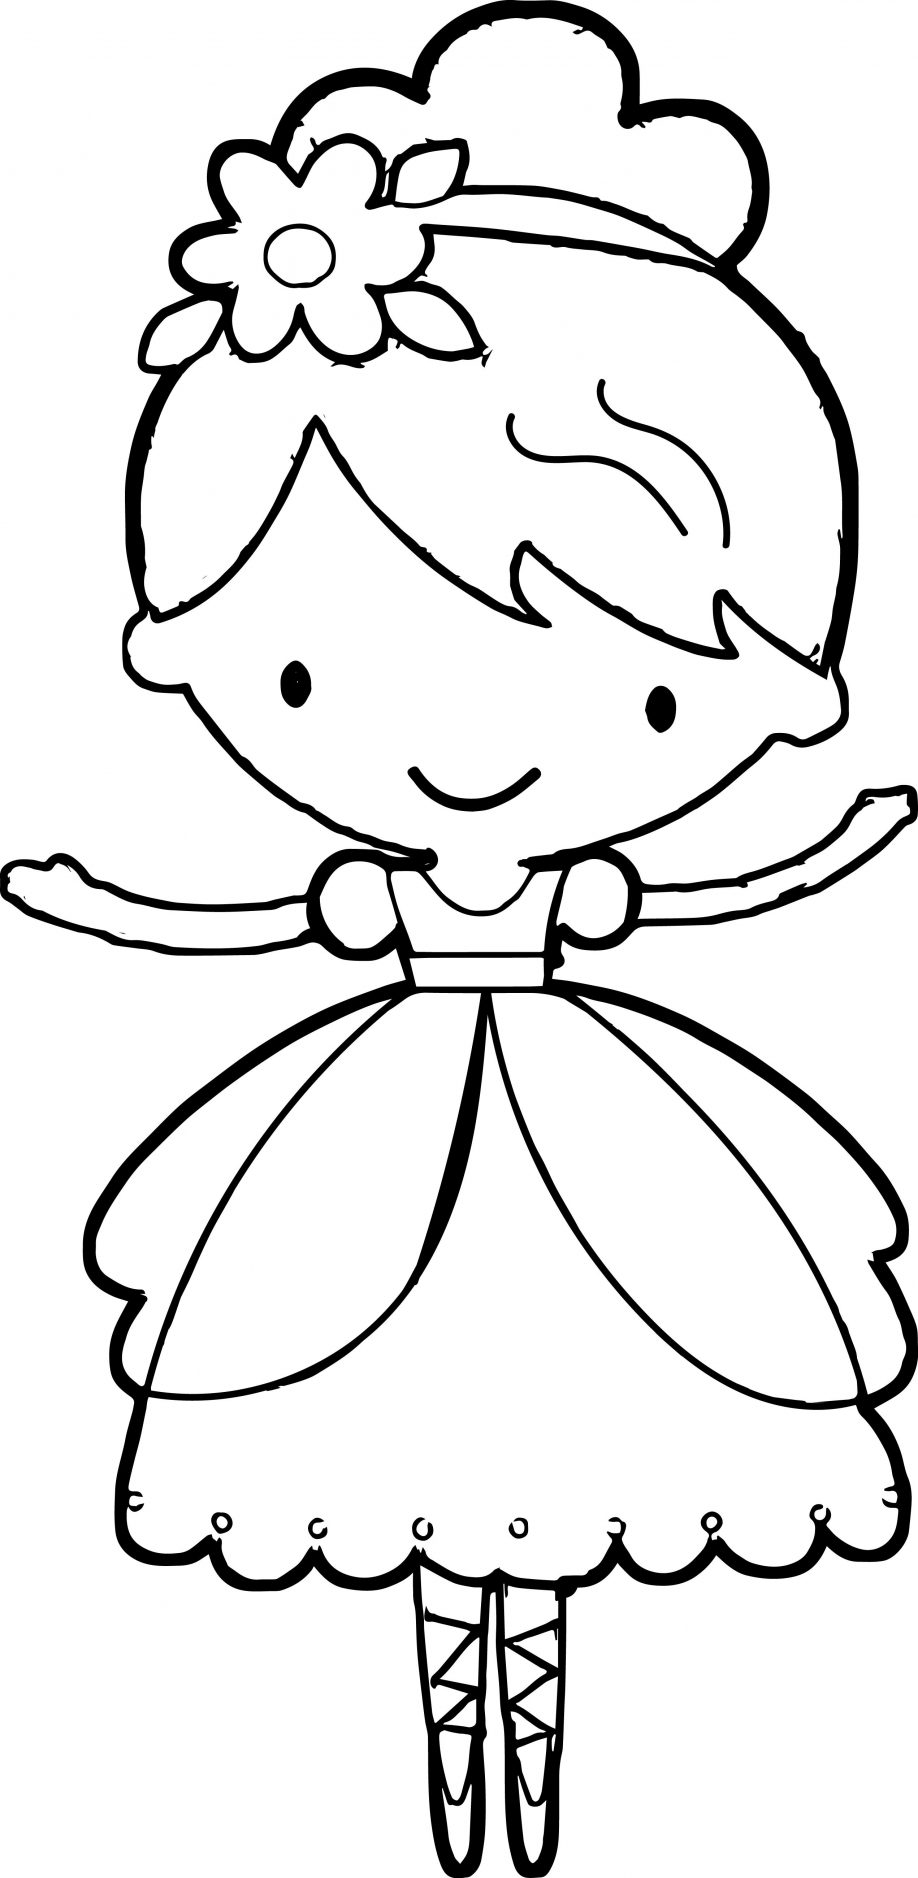 Download Ballerina Coloring Pages Gif Color Pages Collection